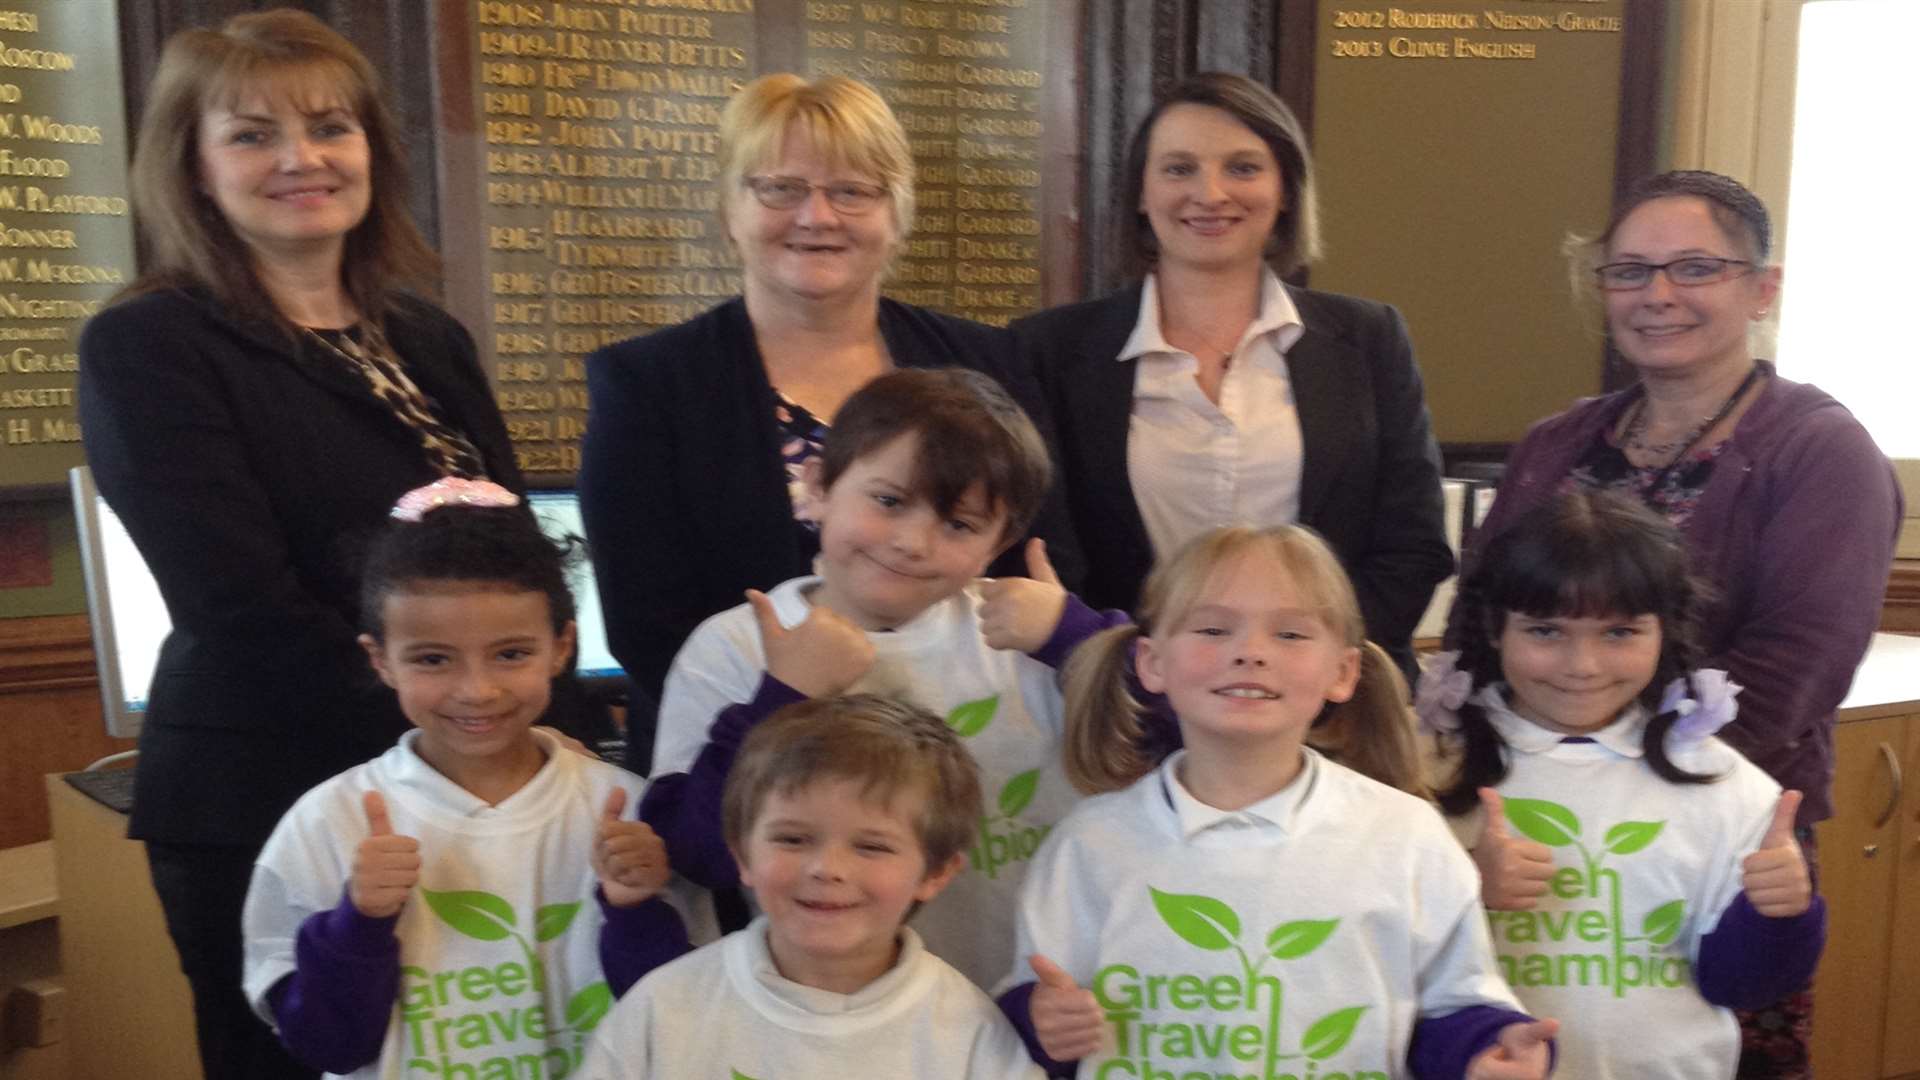 (From left) Caroline McBride from Golding Homes, Cllr Maron Ring, Paula Warrington from Babybel and Sarah Jane Edwards-Bonner from Maidstone Borough Council with children from Archbishop Courtenay primary school.